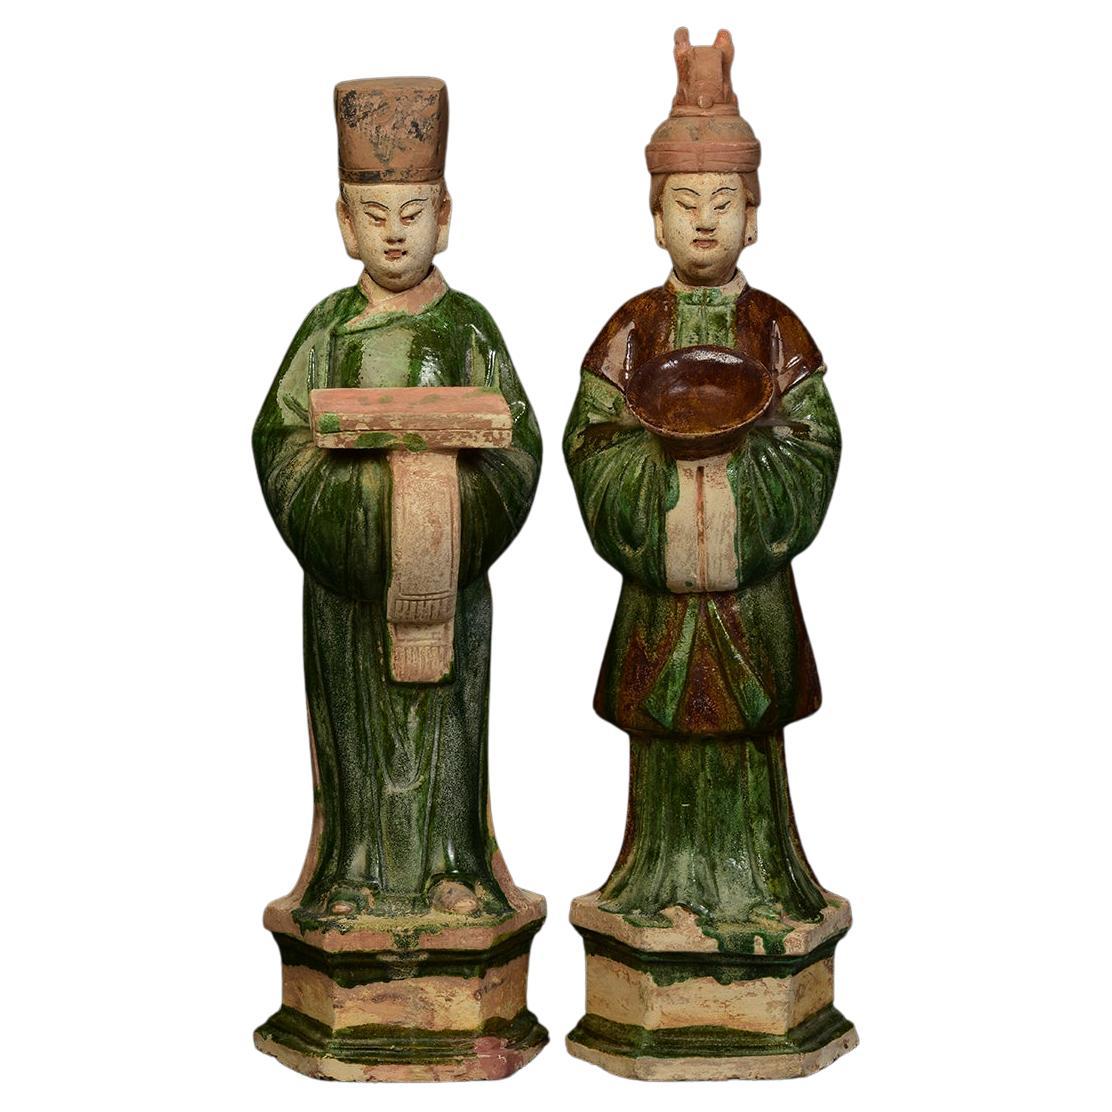 Antique Asian Sculptures and Carvings - 3,085 For Sale at 1stDibs 